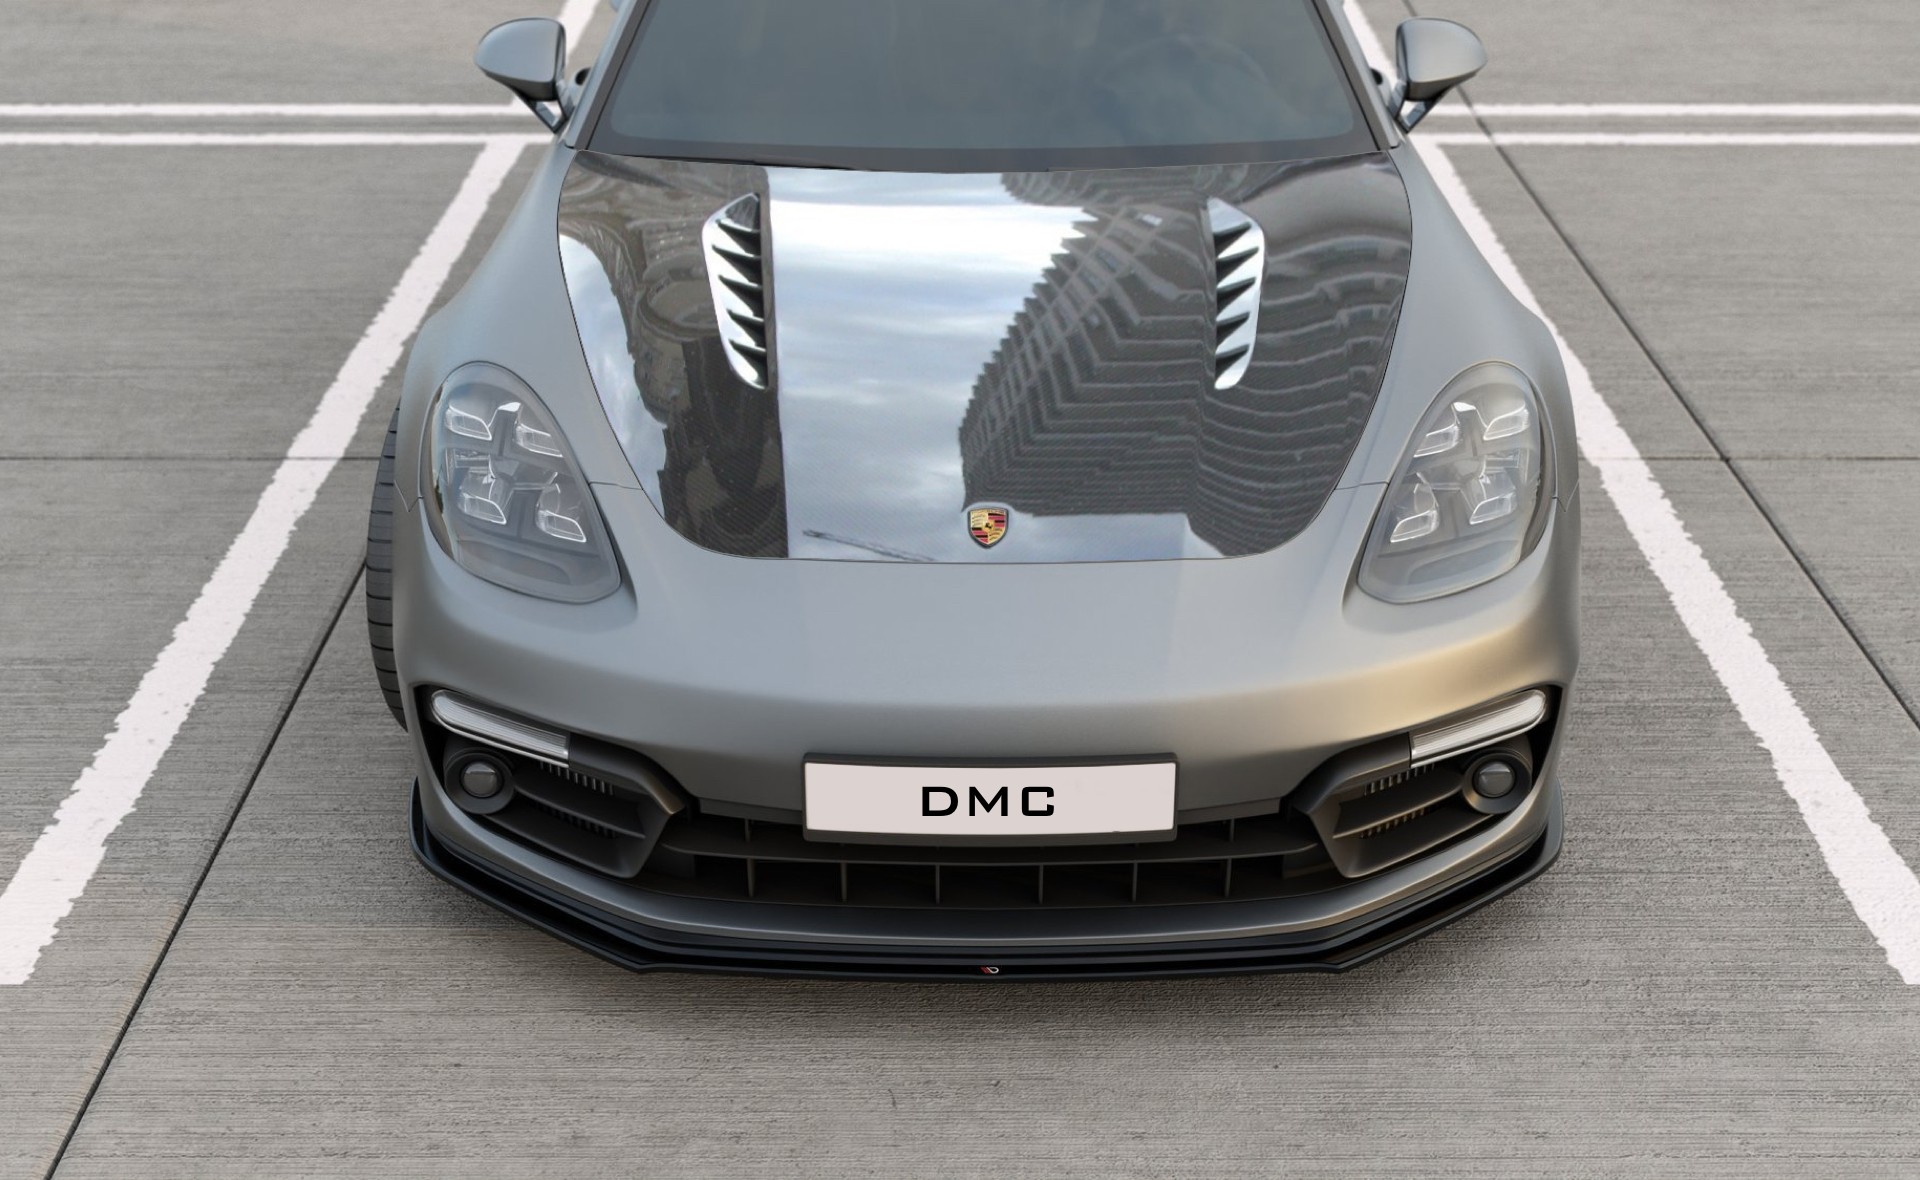 Porsche Panamera Gets Forged Carbon Body Kit From Dmc Autoevolution